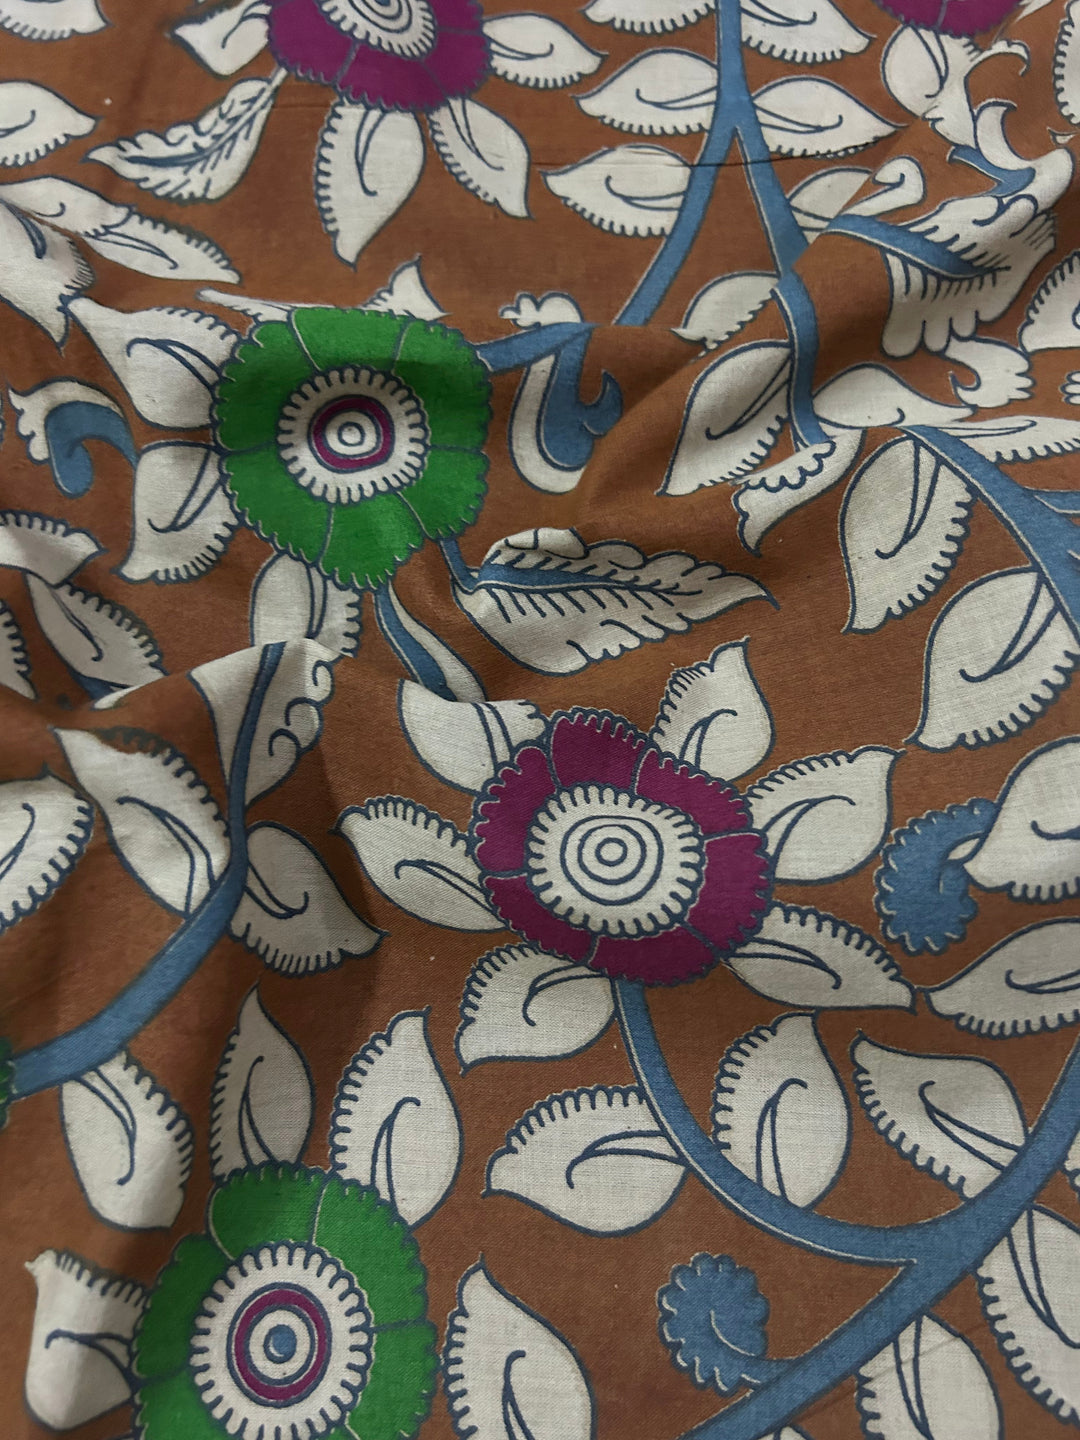 Brown Cotton Fabric With Flower Print